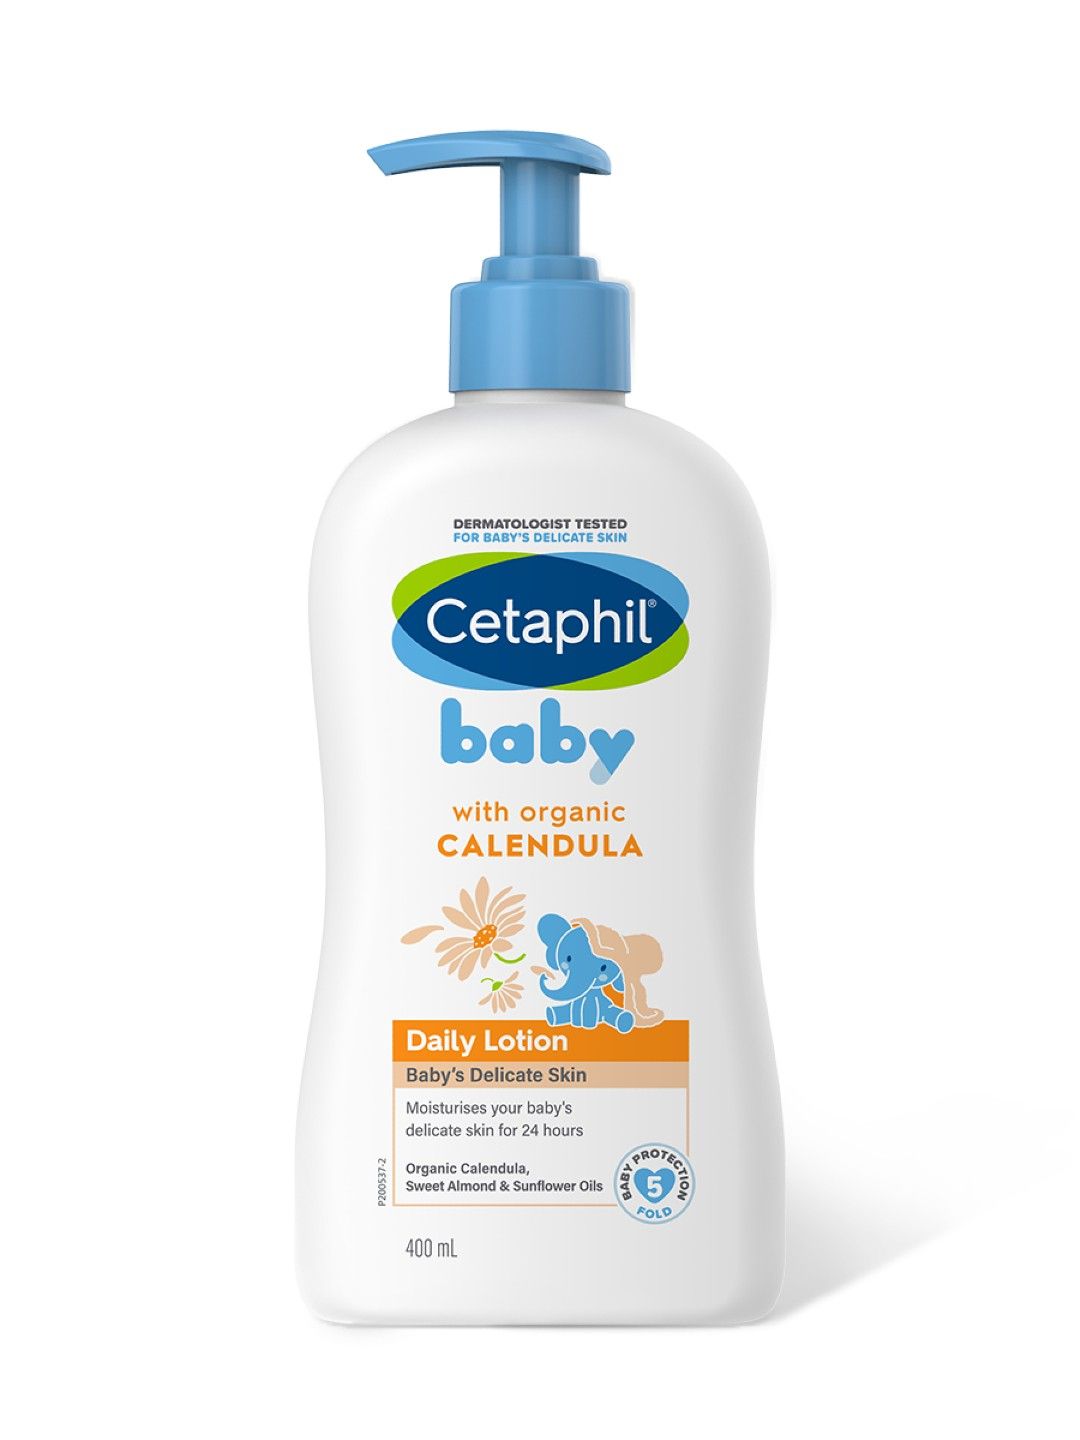 Cetaphil Baby Daily Lotion with Organic Calendula - 400ml